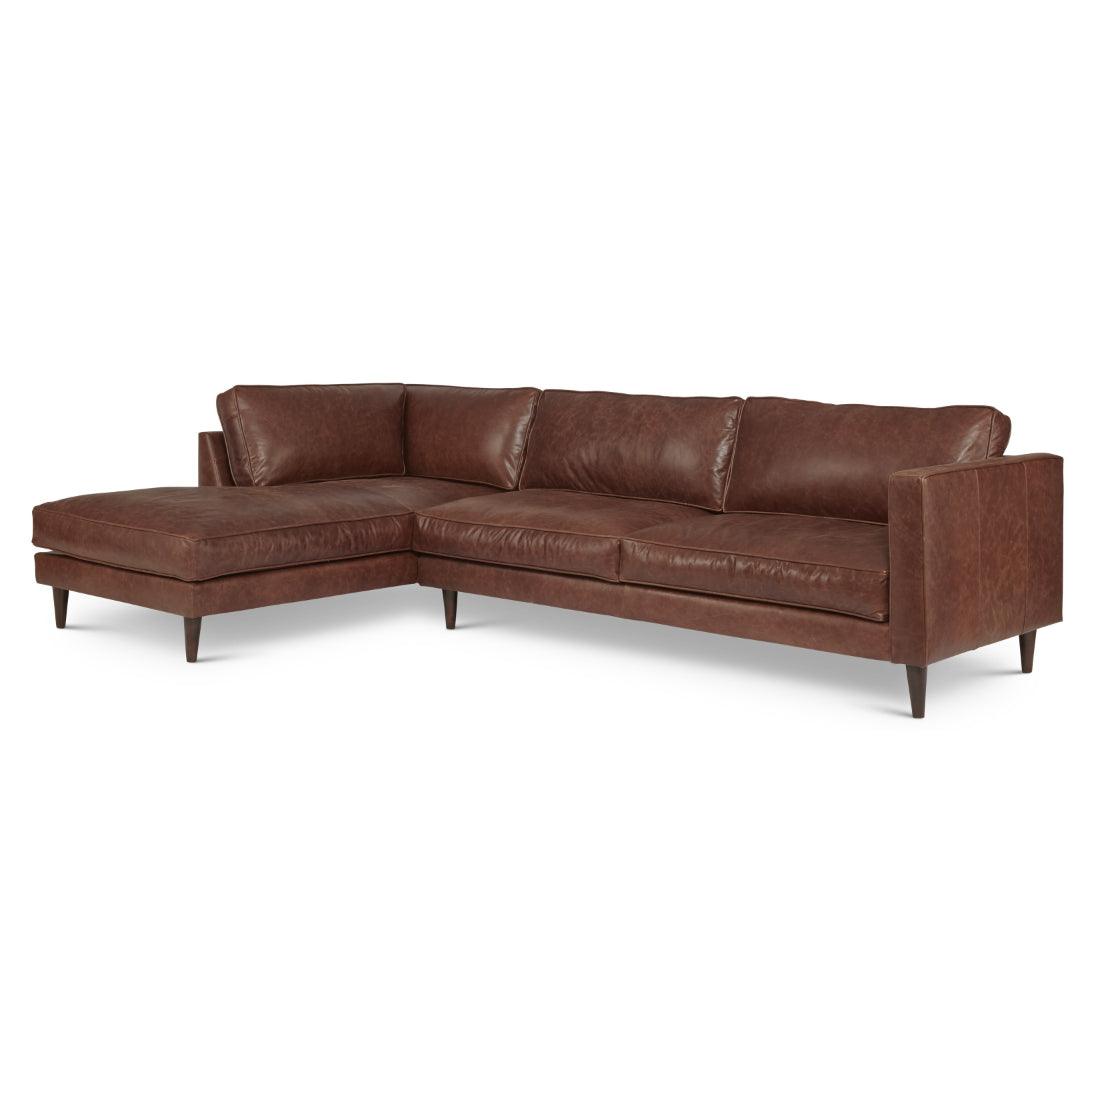 Cheviot Leather Right Arm Sectional with Chaise Made to Order - Uptown Sebastian